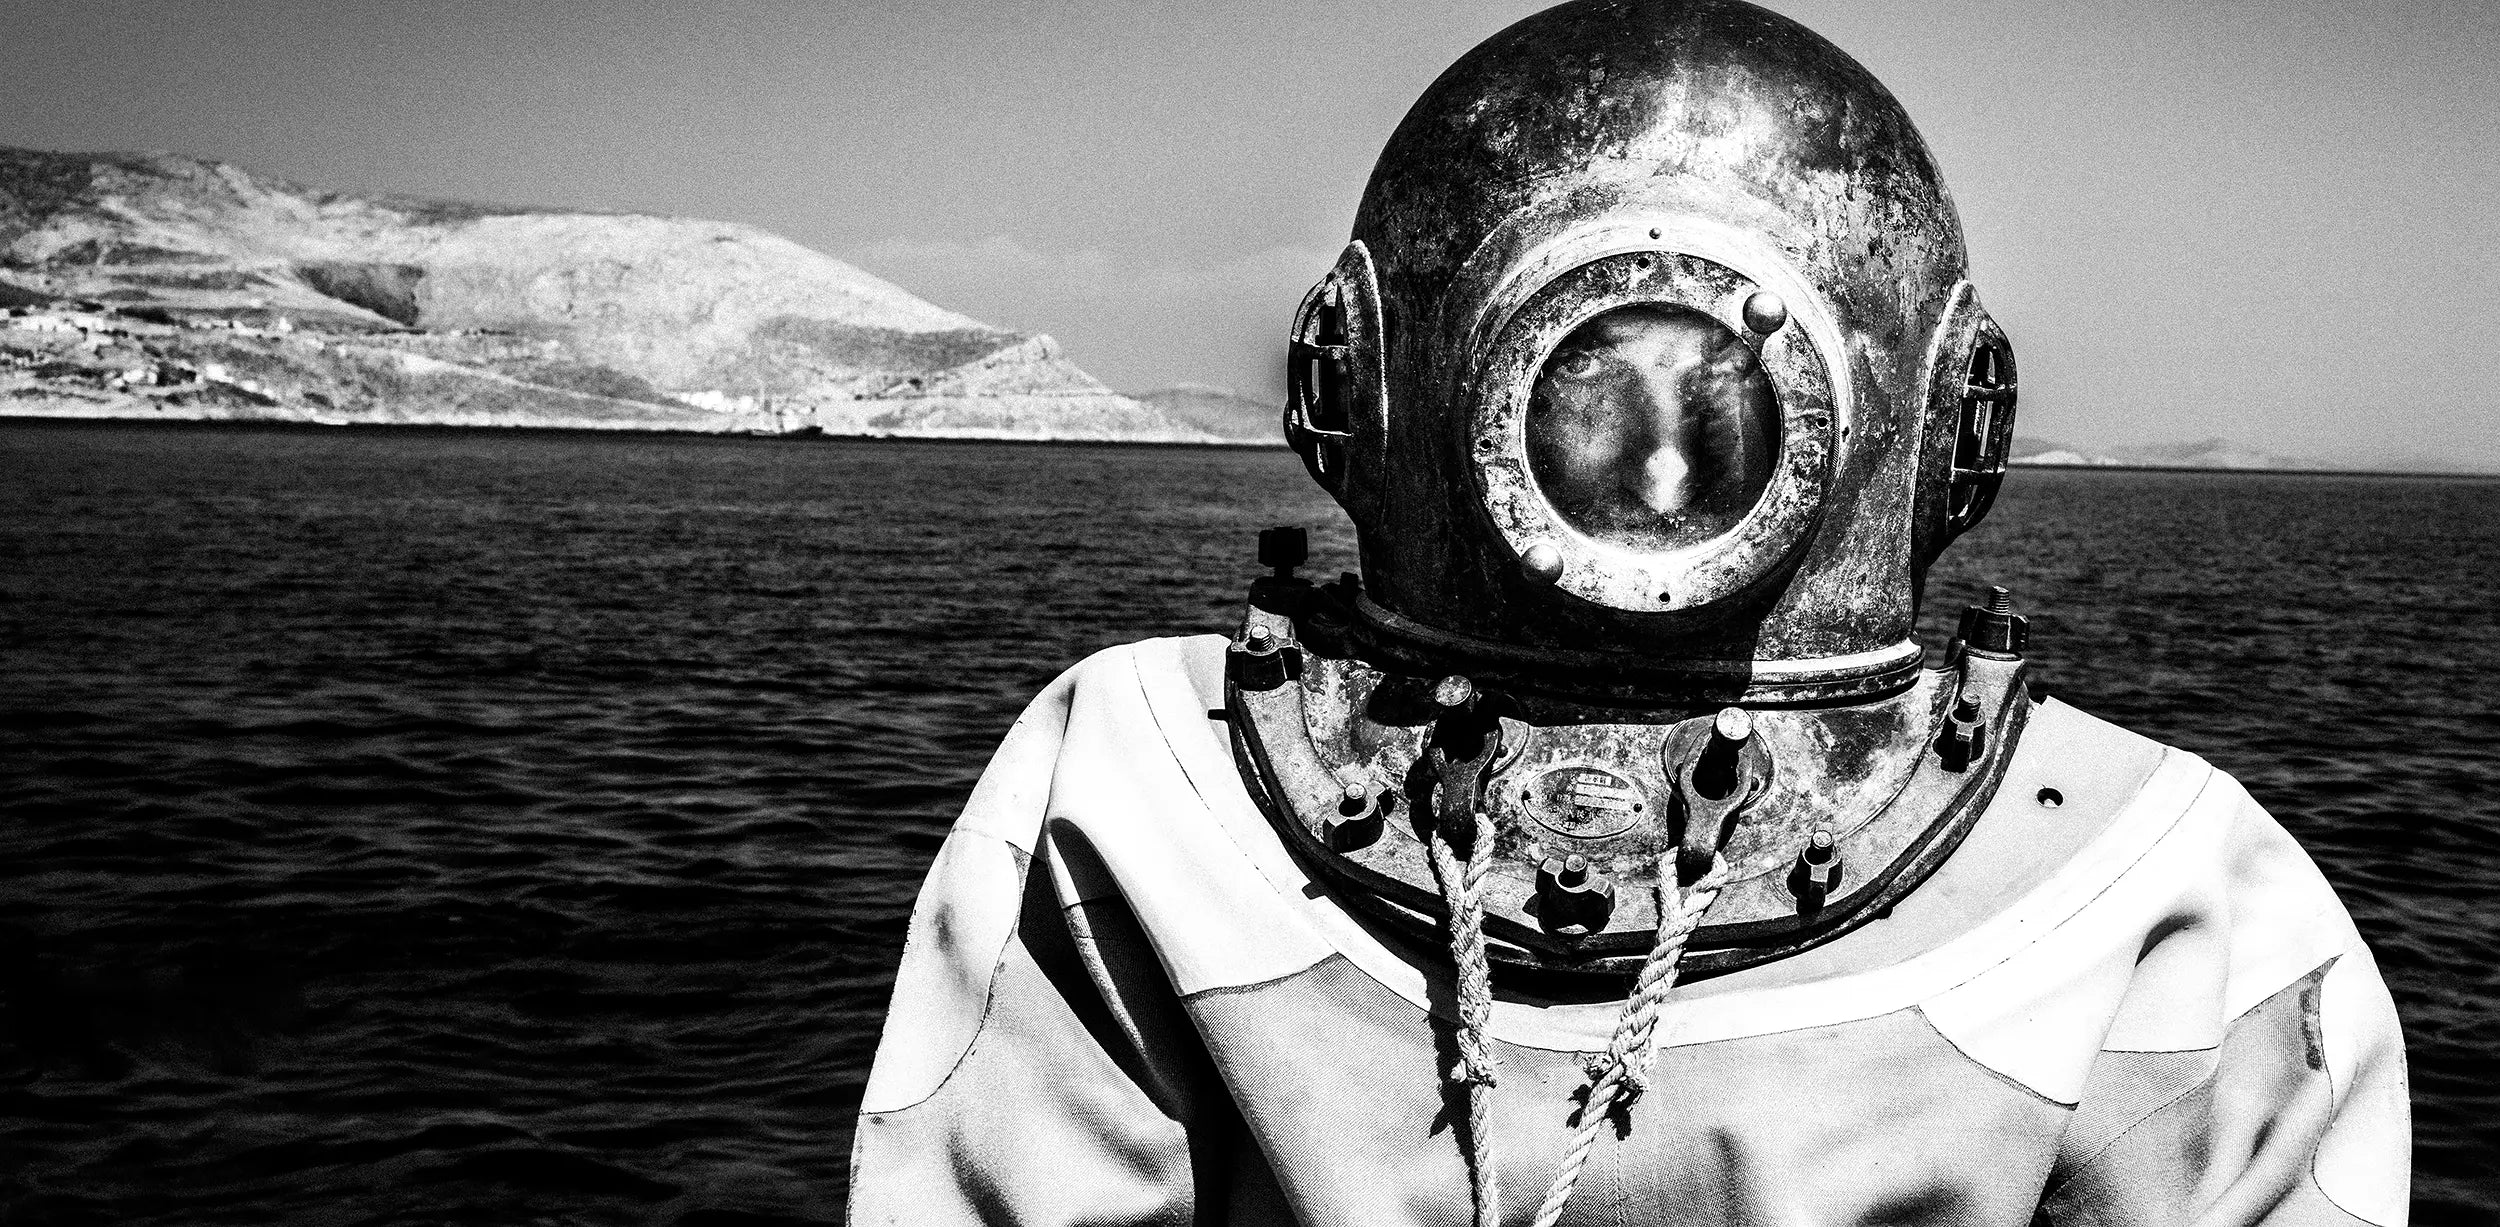 Black and white photography by George Tatakis of a man wearing a traditional sponge-diving suit on Kalymnos, Greece.